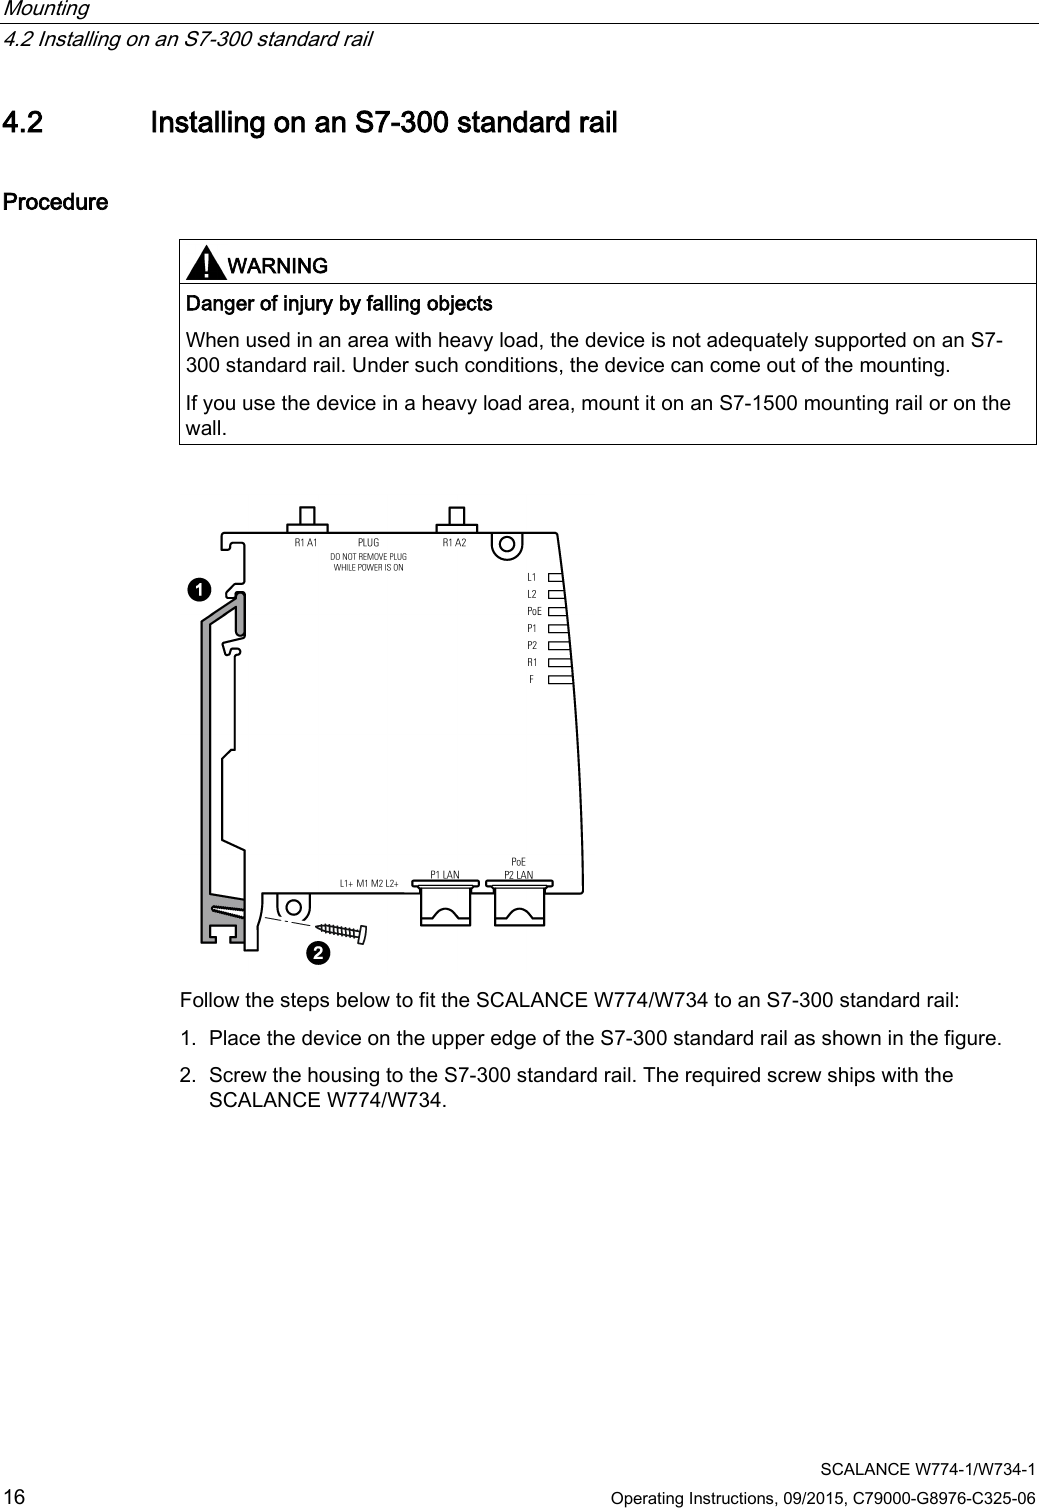 Mounting   4.2 Installing on an S7-300 standard rail  SCALANCE W774-1/W734-1 16 Operating Instructions, 09/2015, C79000-G8976-C325-06 4.2 Installing on an S7-300 standard rail Procedure   WARNING Danger of injury by falling objects When used in an area with heavy load, the device is not adequately supported on an S7-300 standard rail. Under such conditions, the device can come out of the mounting. If you use the device in a heavy load area, mount it on an S7-1500 mounting rail or on the wall.   Follow the steps below to fit the SCALANCE W774/W734 to an S7-300 standard rail: 1. Place the device on the upper edge of the S7-300 standard rail as shown in the figure. 2. Screw the housing to the S7-300 standard rail. The required screw ships with the SCALANCE W774/W734.  